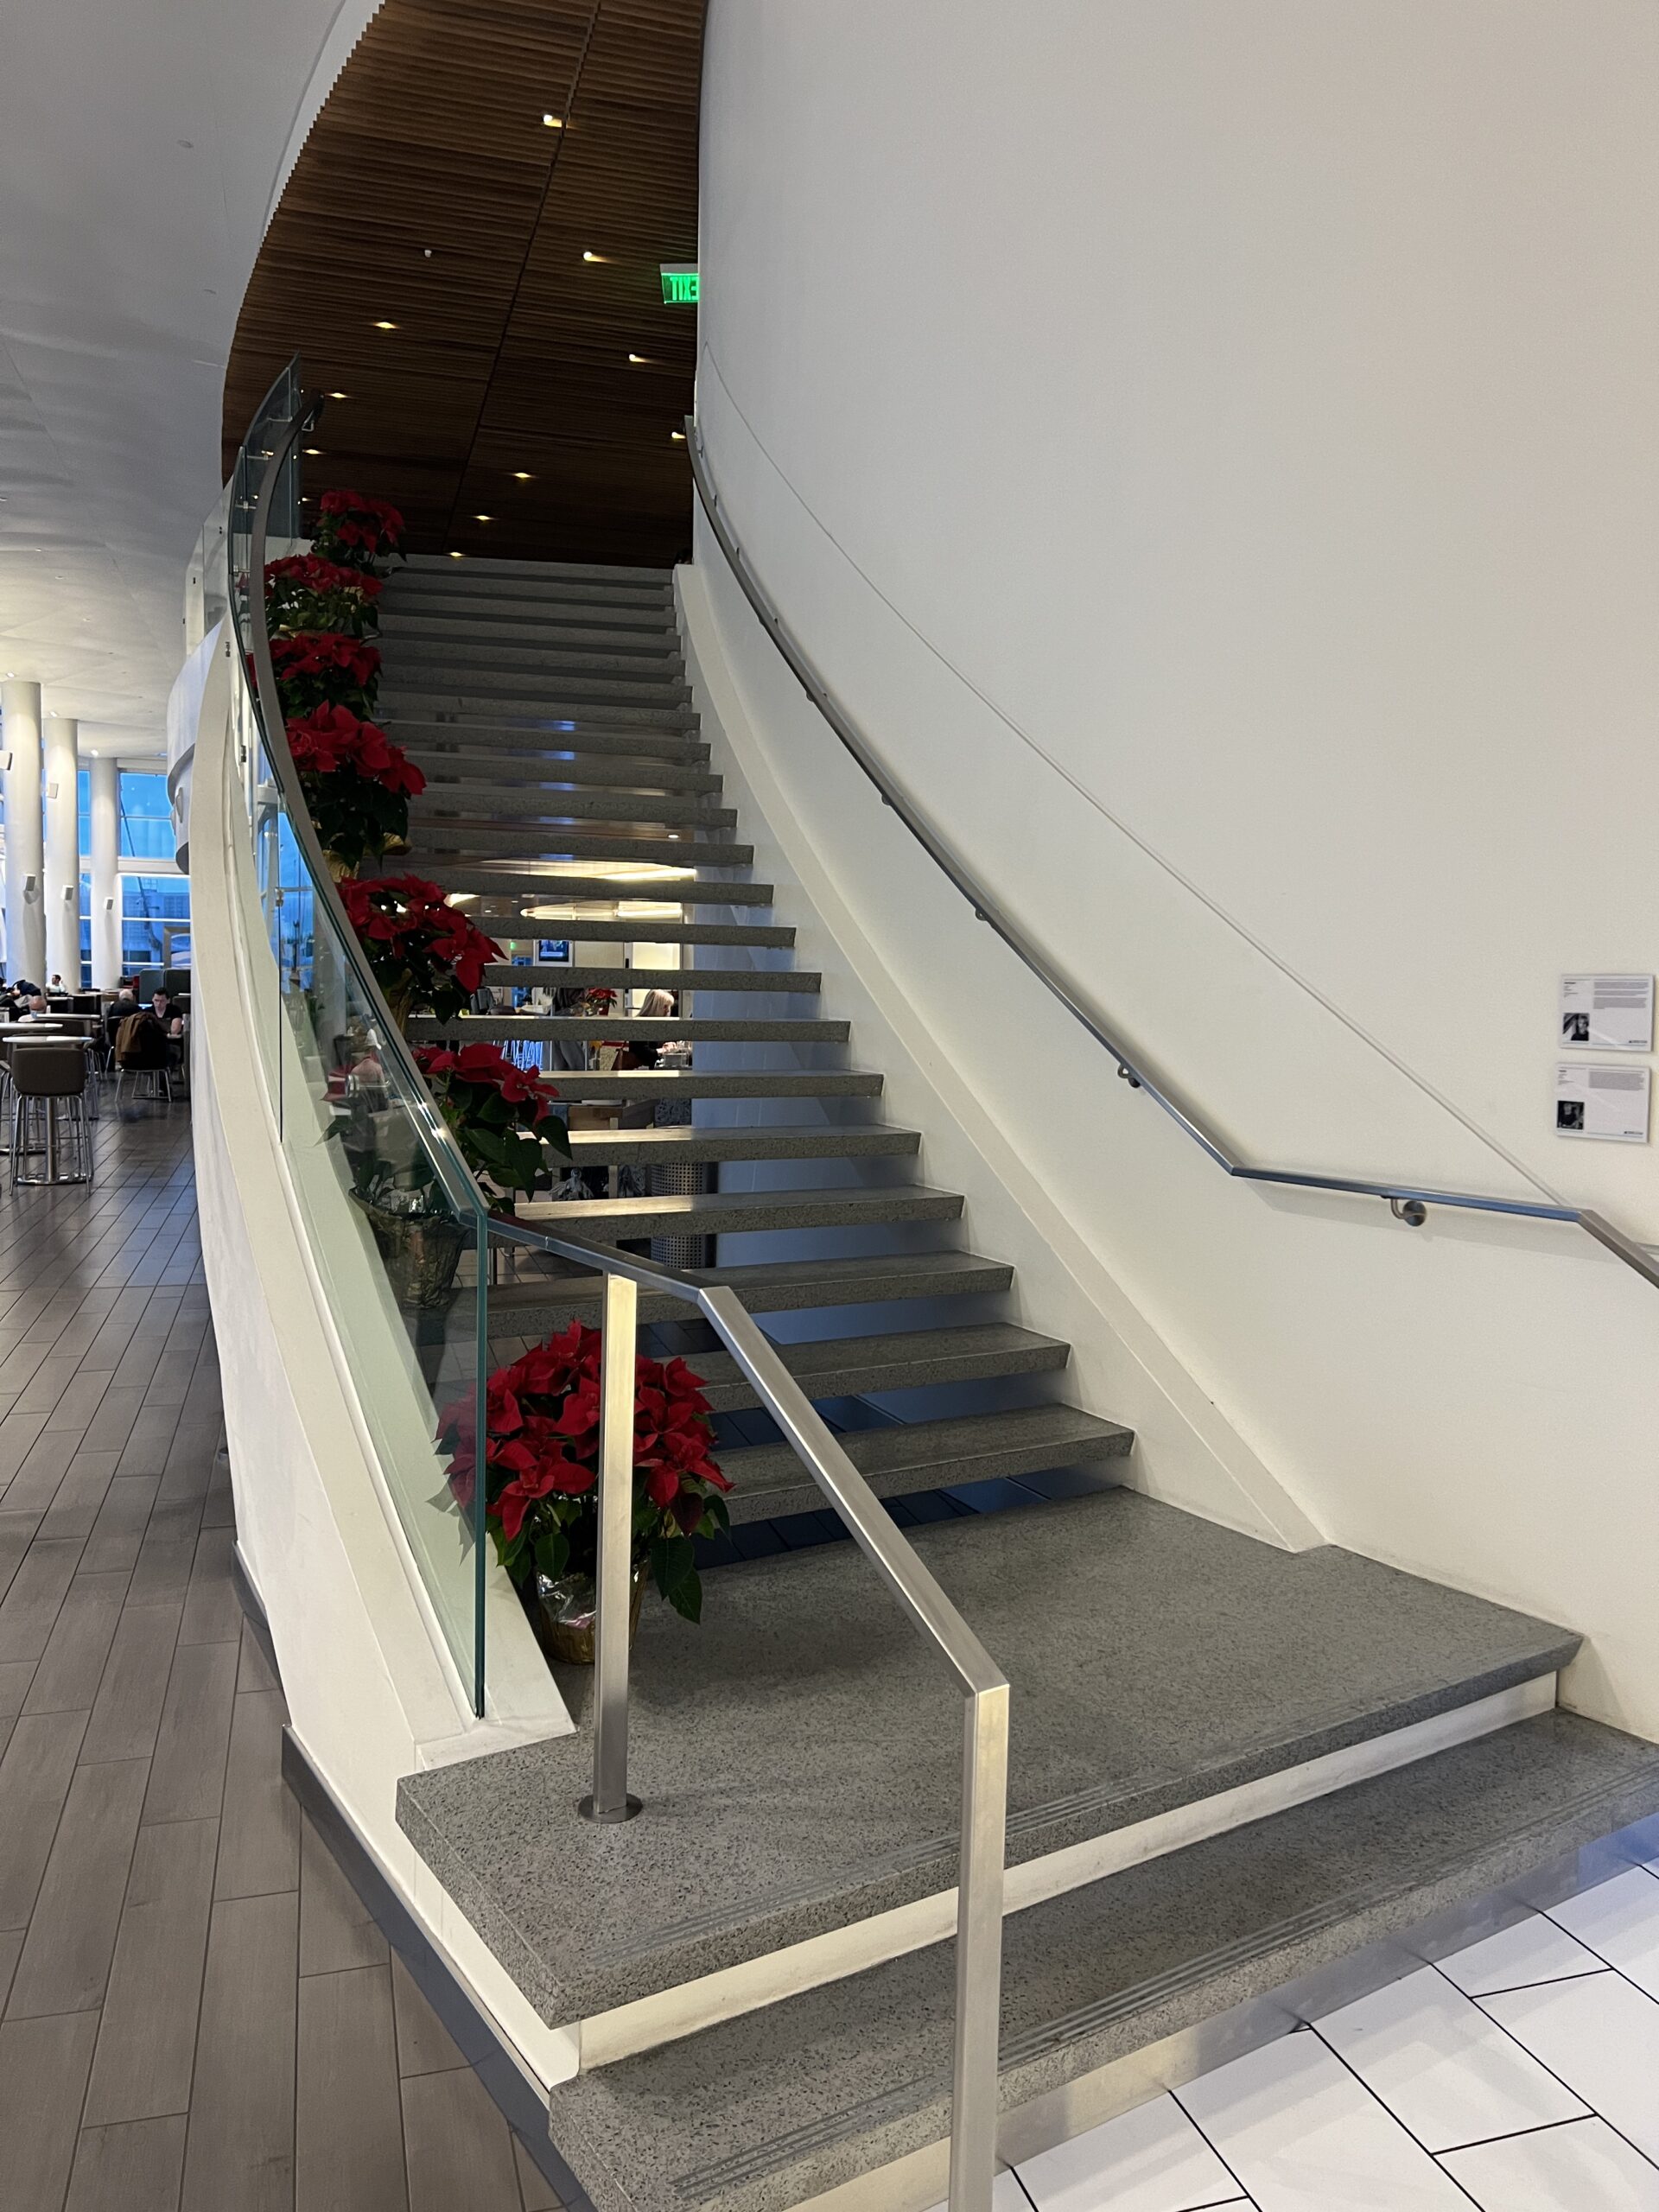 Delta Sky Club SEA Stairs